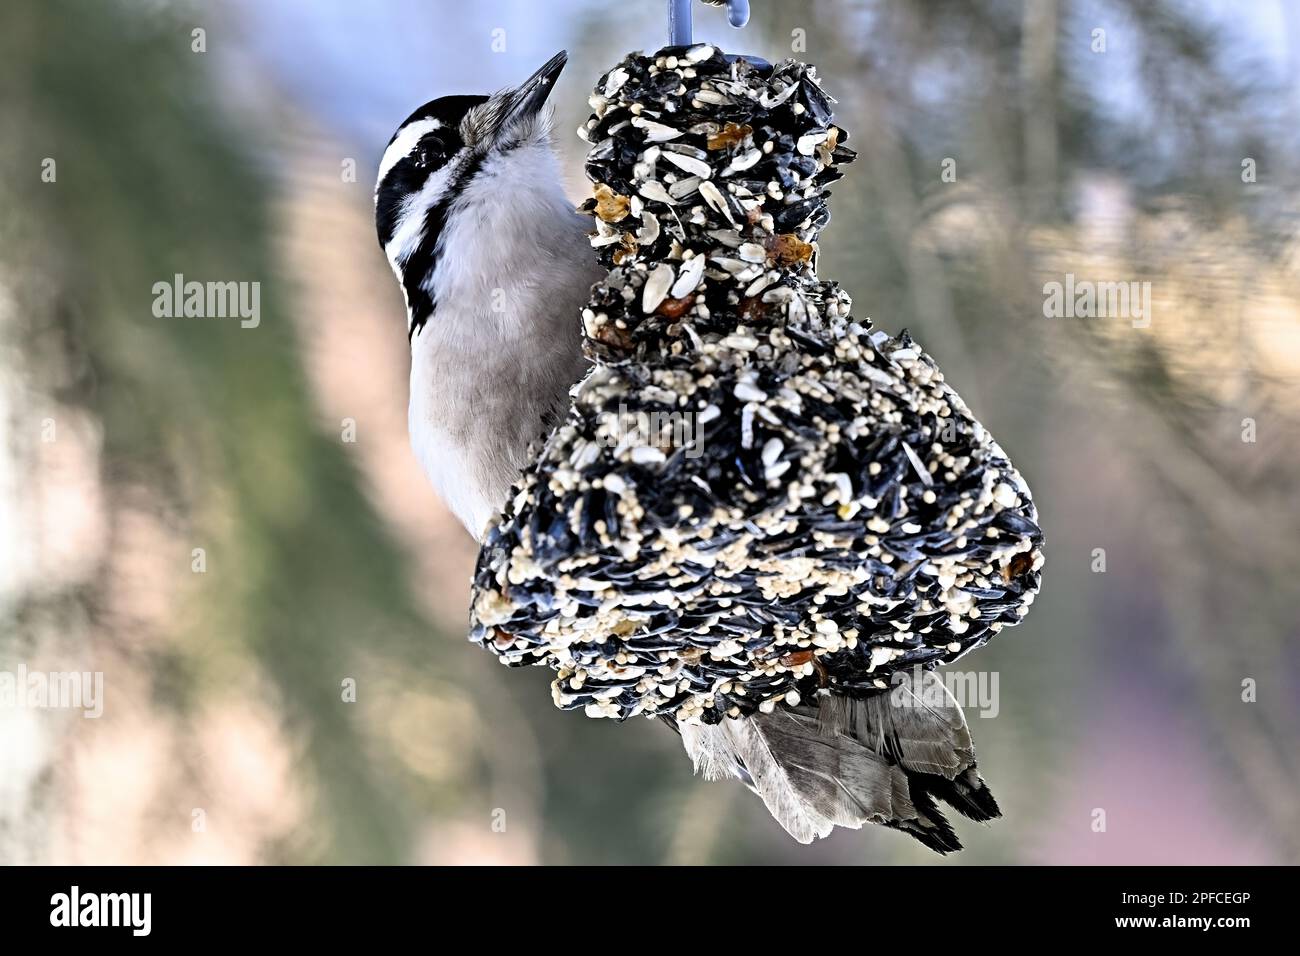 A wild Hairy Woodpecker 'Picoides pubescens', perched on a seed and suet feeder in rural Alberta Canada, Stock Photo